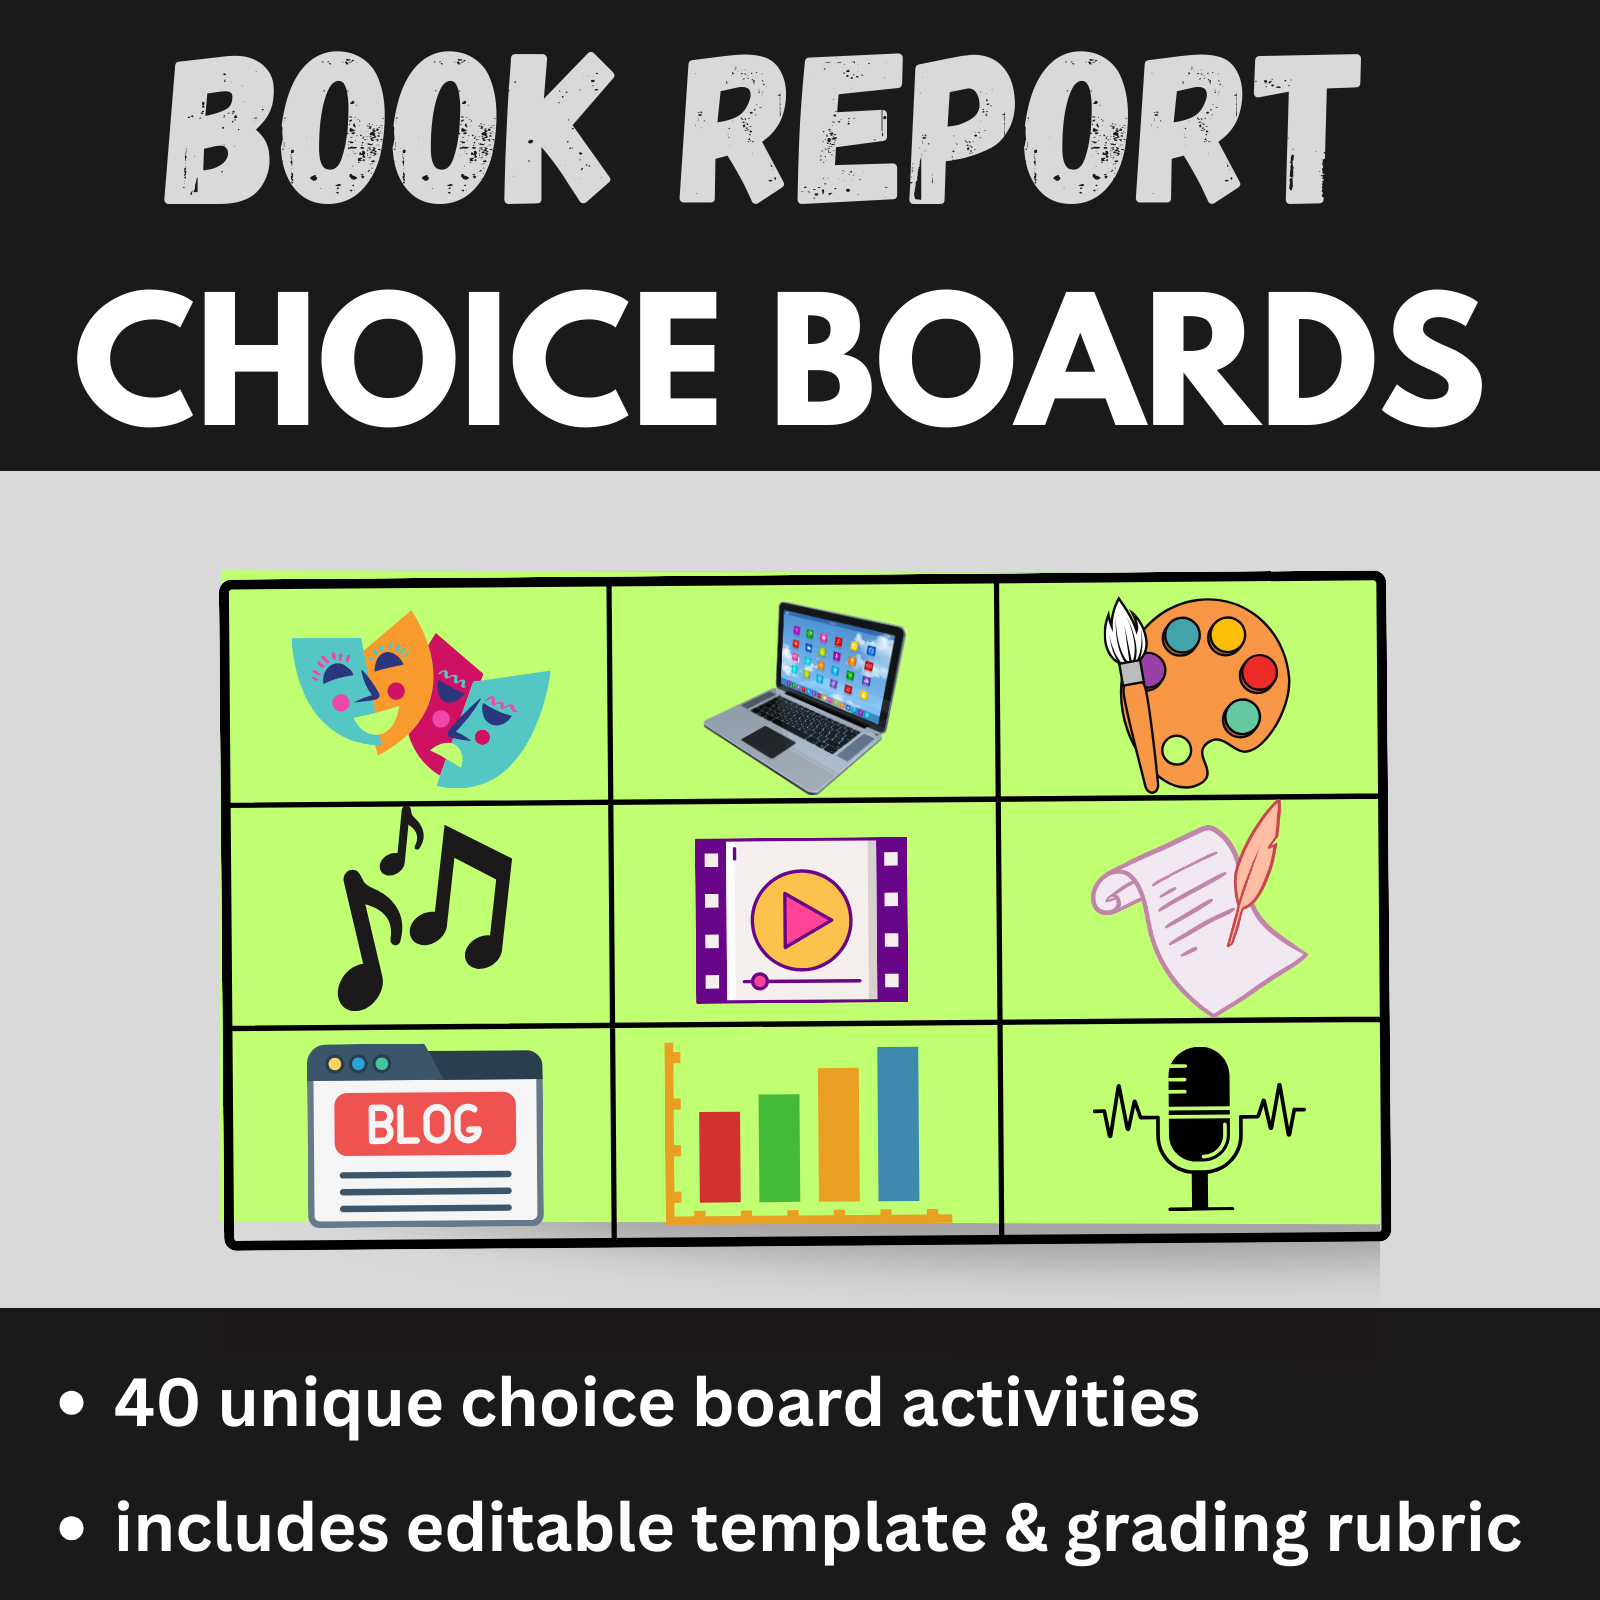 black background with white text that says "book report choice boards. 40 unique choice board activities. includes editable template and grading rubric. In the middle is a green decorative image that represents a 9-cewll choice board for students.